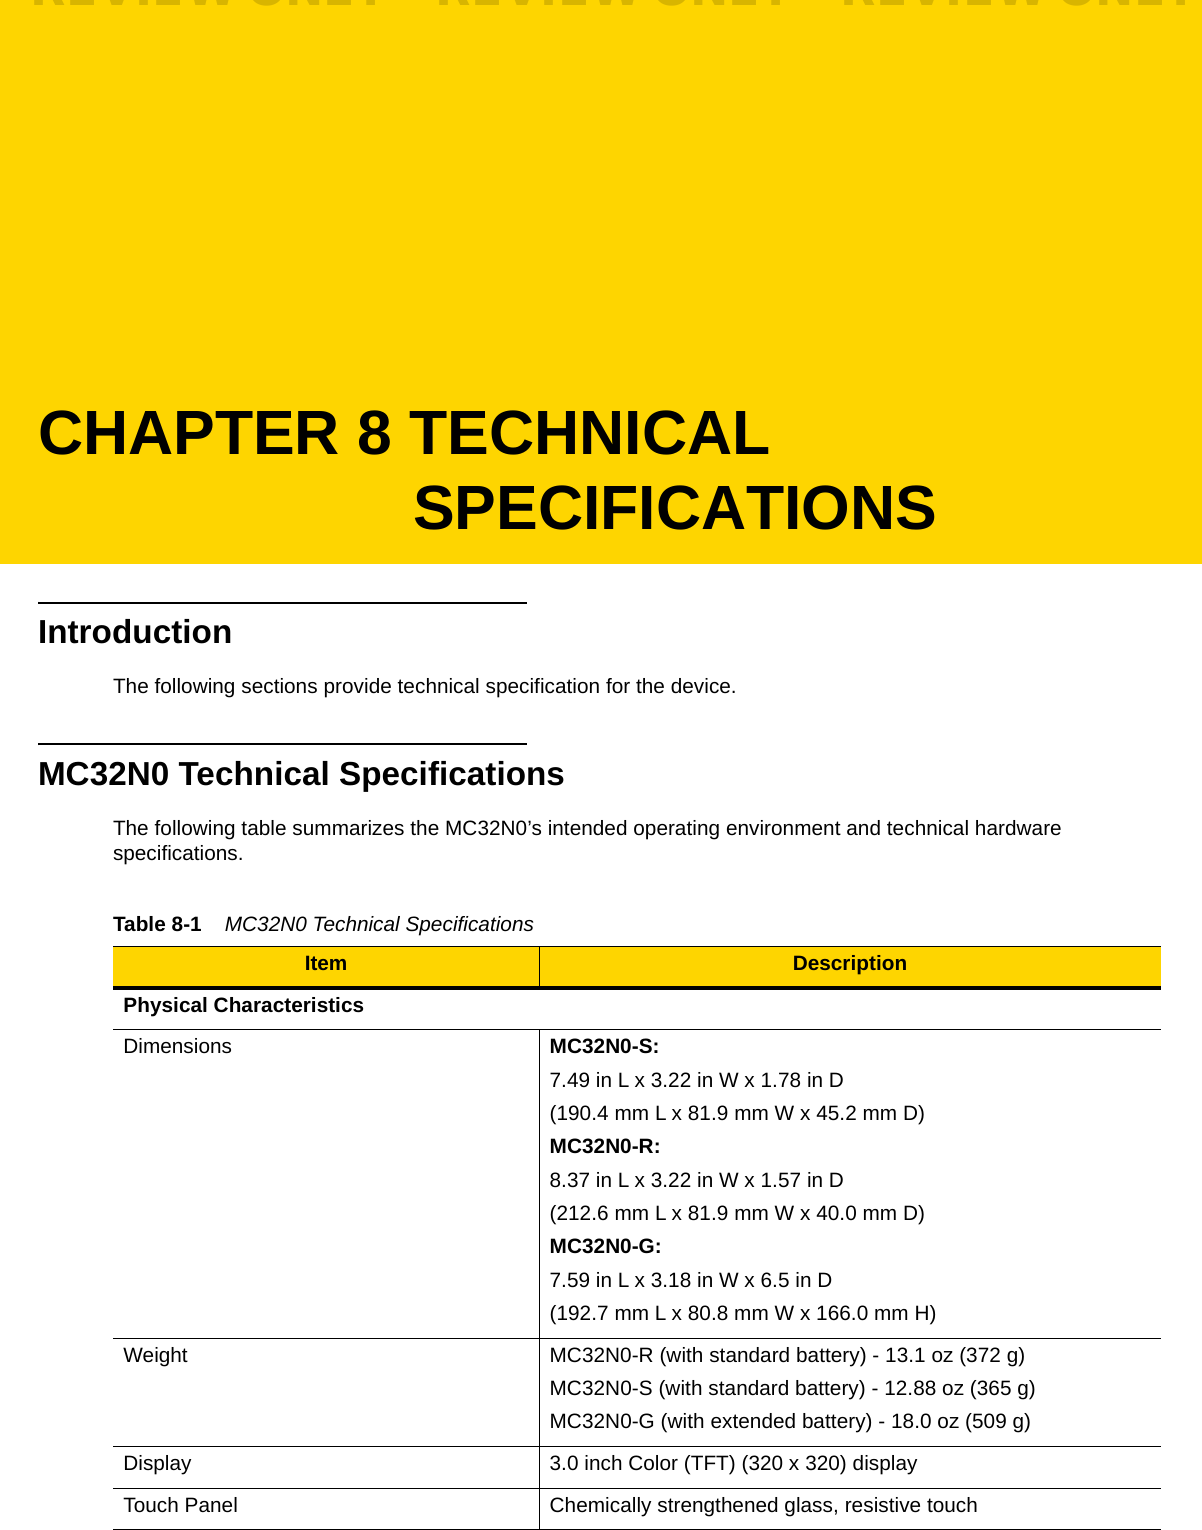 CHAPTER 8 TECHNICAL SPECIFICATIONSIntroductionThe following sections provide technical specification for the device.MC32N0 Technical SpecificationsThe following table summarizes the MC32N0’s intended operating environment and technical hardware specifications.Table 8-1    MC32N0 Technical Specifications Item DescriptionPhysical CharacteristicsDimensions MC32N0-S:7.49 in L x 3.22 in W x 1.78 in D(190.4 mm L x 81.9 mm W x 45.2 mm D)MC32N0-R:8.37 in L x 3.22 in W x 1.57 in D(212.6 mm L x 81.9 mm W x 40.0 mm D)MC32N0-G:7.59 in L x 3.18 in W x 6.5 in D(192.7 mm L x 80.8 mm W x 166.0 mm H)Weight MC32N0-R (with standard battery) - 13.1 oz (372 g)MC32N0-S (with standard battery) - 12.88 oz (365 g)MC32N0-G (with extended battery) - 18.0 oz (509 g)Display 3.0 inch Color (TFT) (320 x 320) displayTouch Panel Chemically strengthened glass, resistive touchREVIEW ONLY - REVIEW ONLY - REVIEW ONLY                             REVIEW ONLY - REVIEW ONLY - REVIEW ONLY